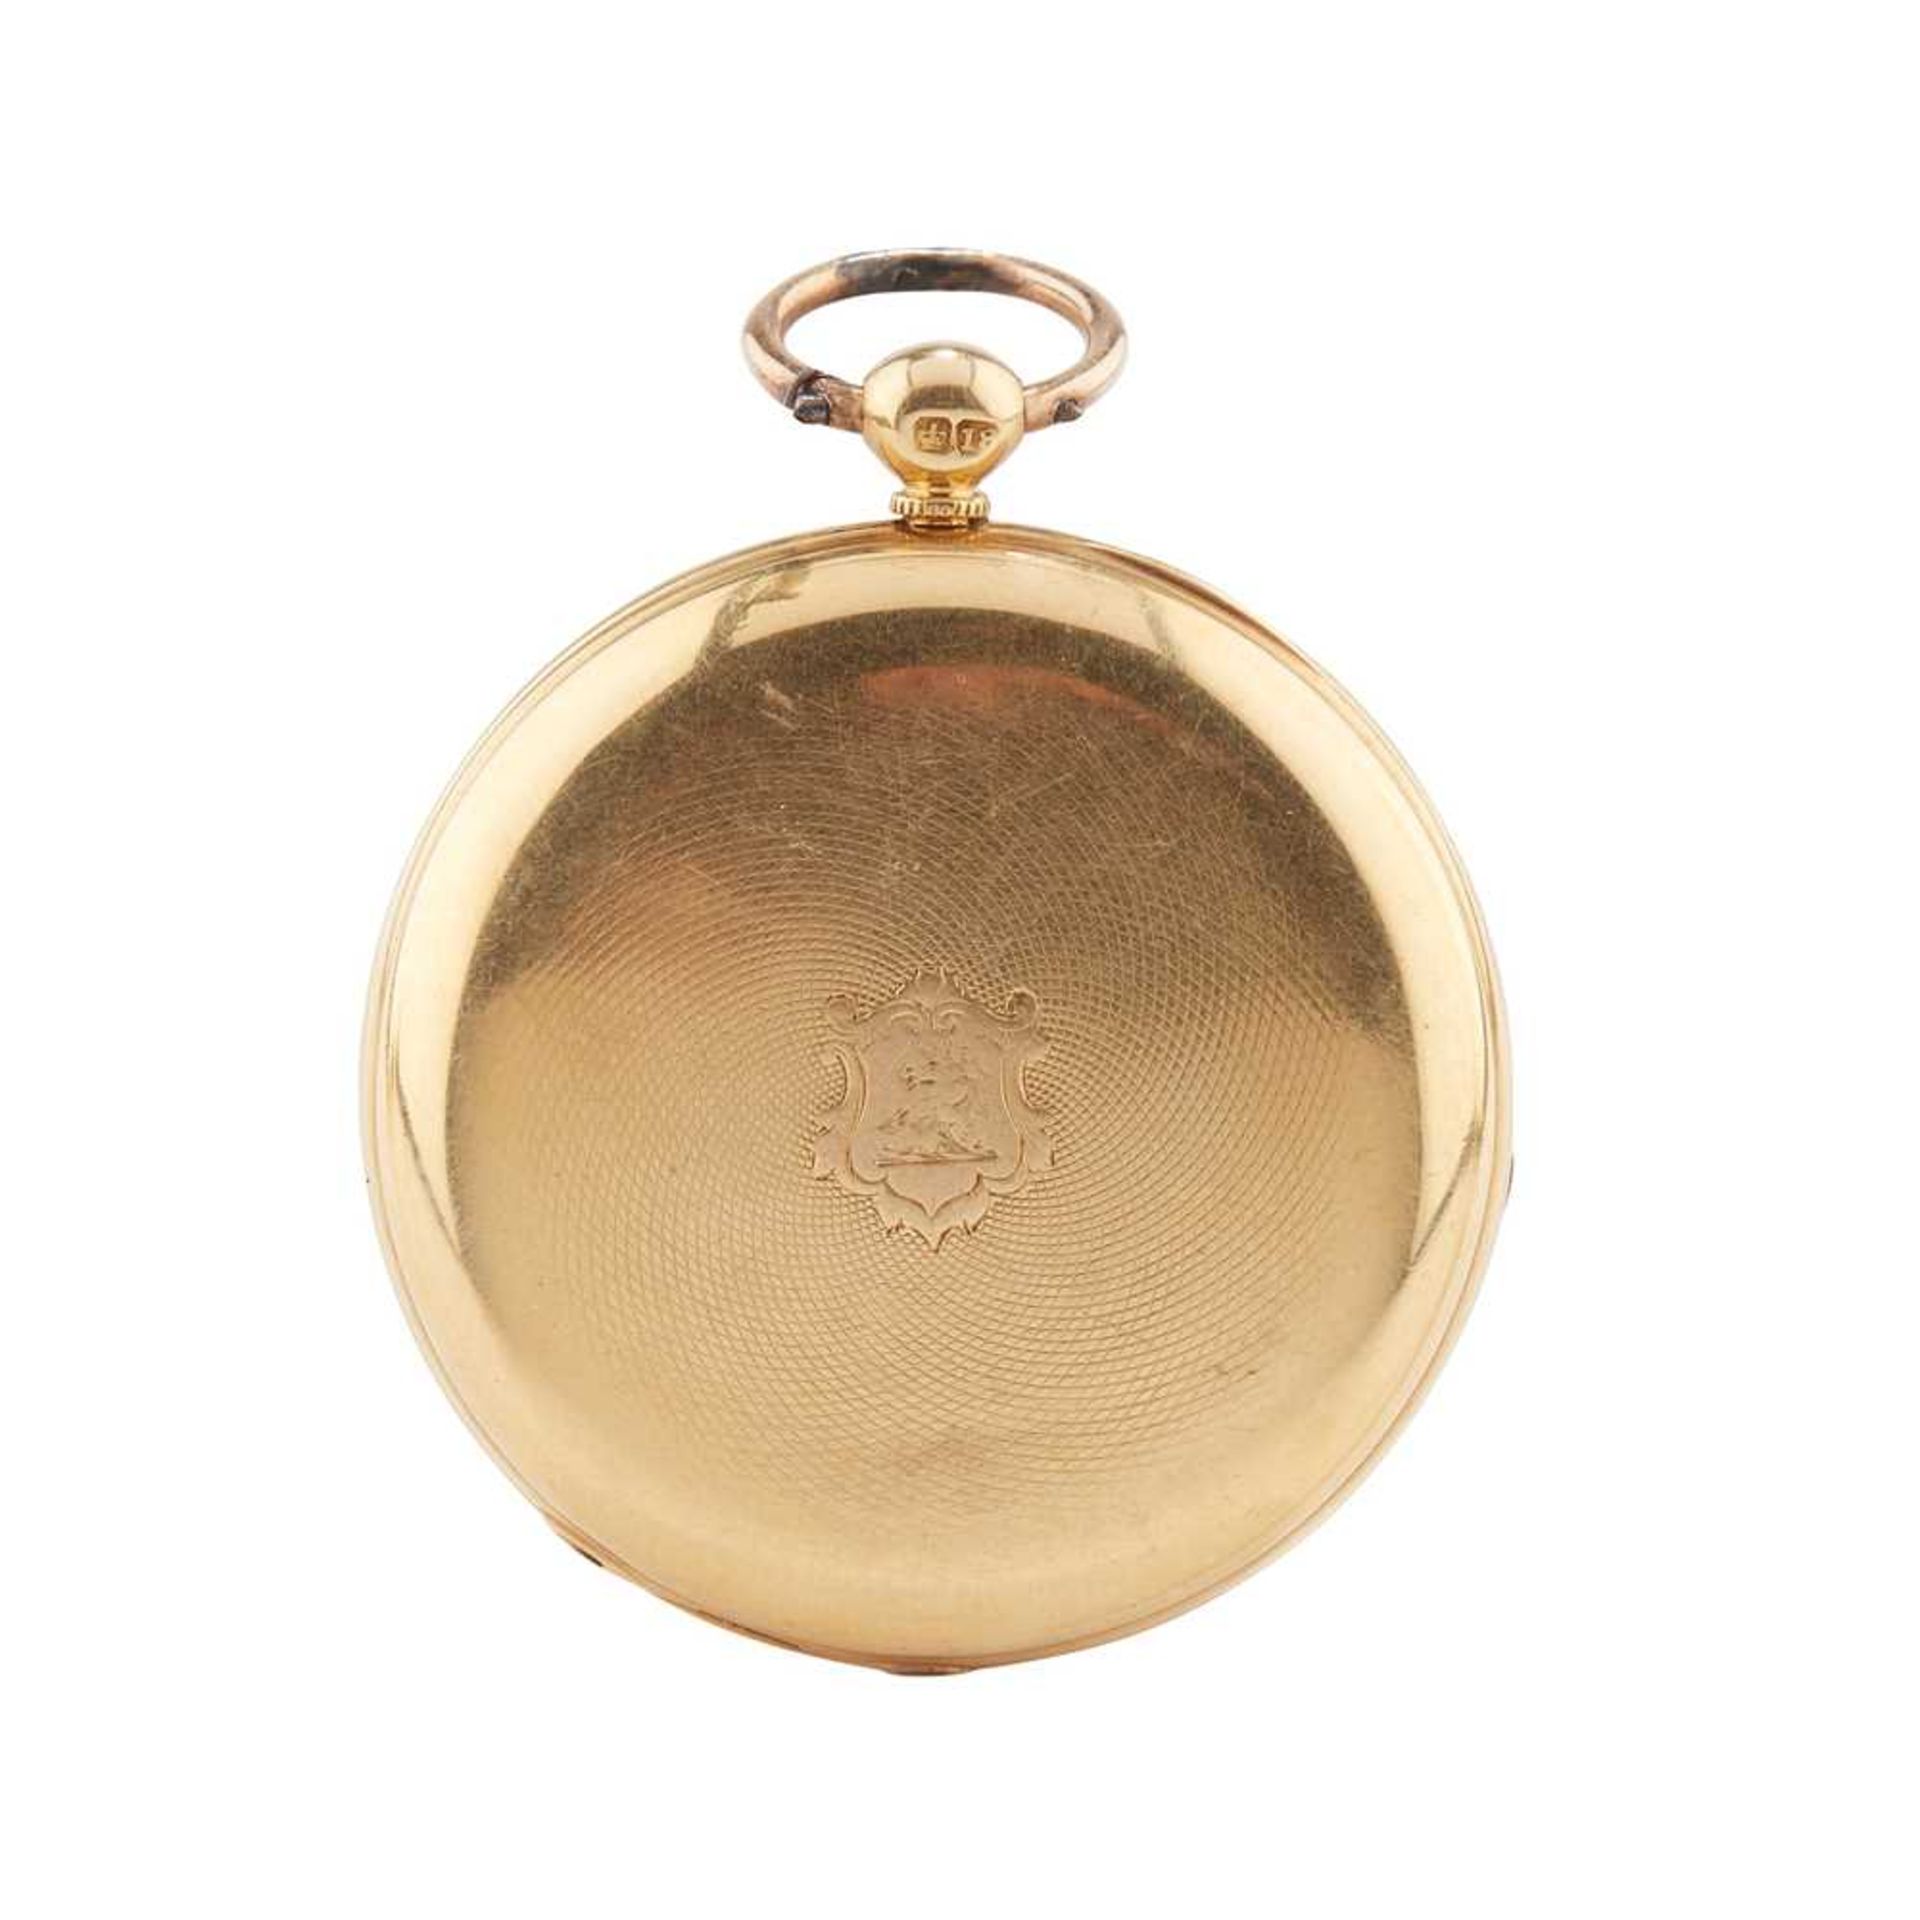 AN 18CT GOLD CASED POCKET WATCH CHARLES FRODSHAM, LONDON - Image 2 of 5